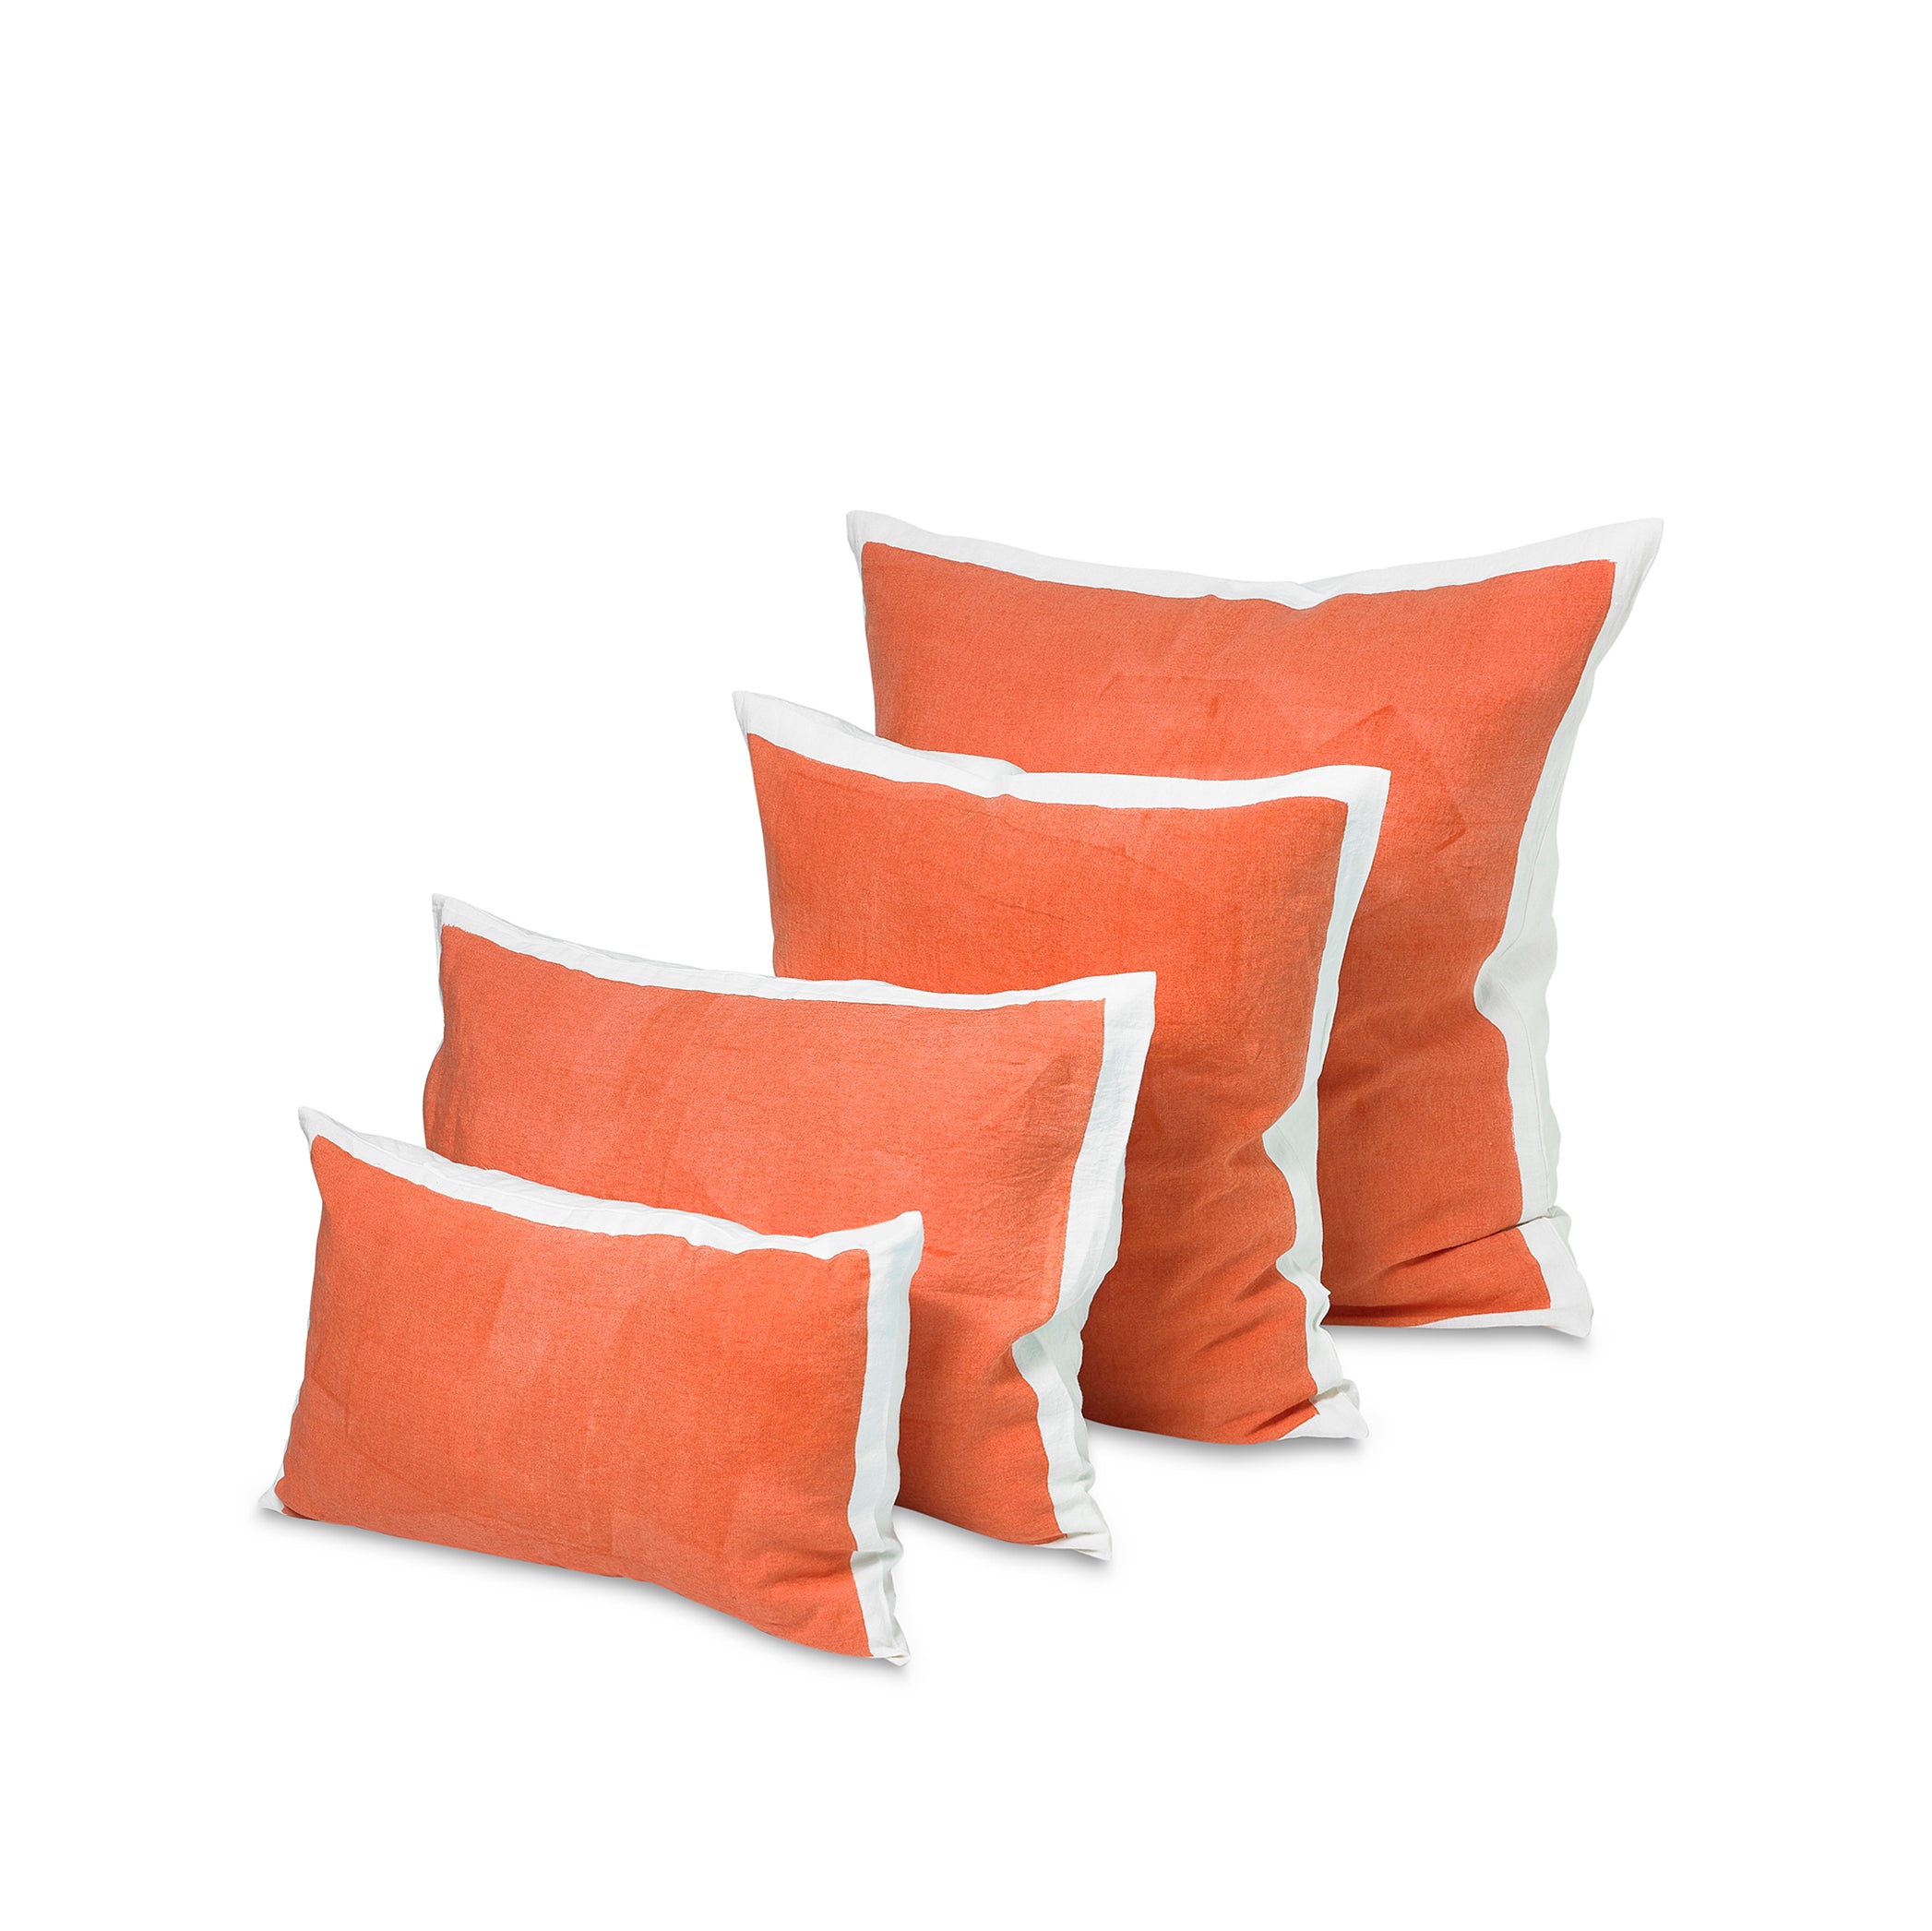 Hand Painted Linen Cushion in Coral, 50cm x 30cm